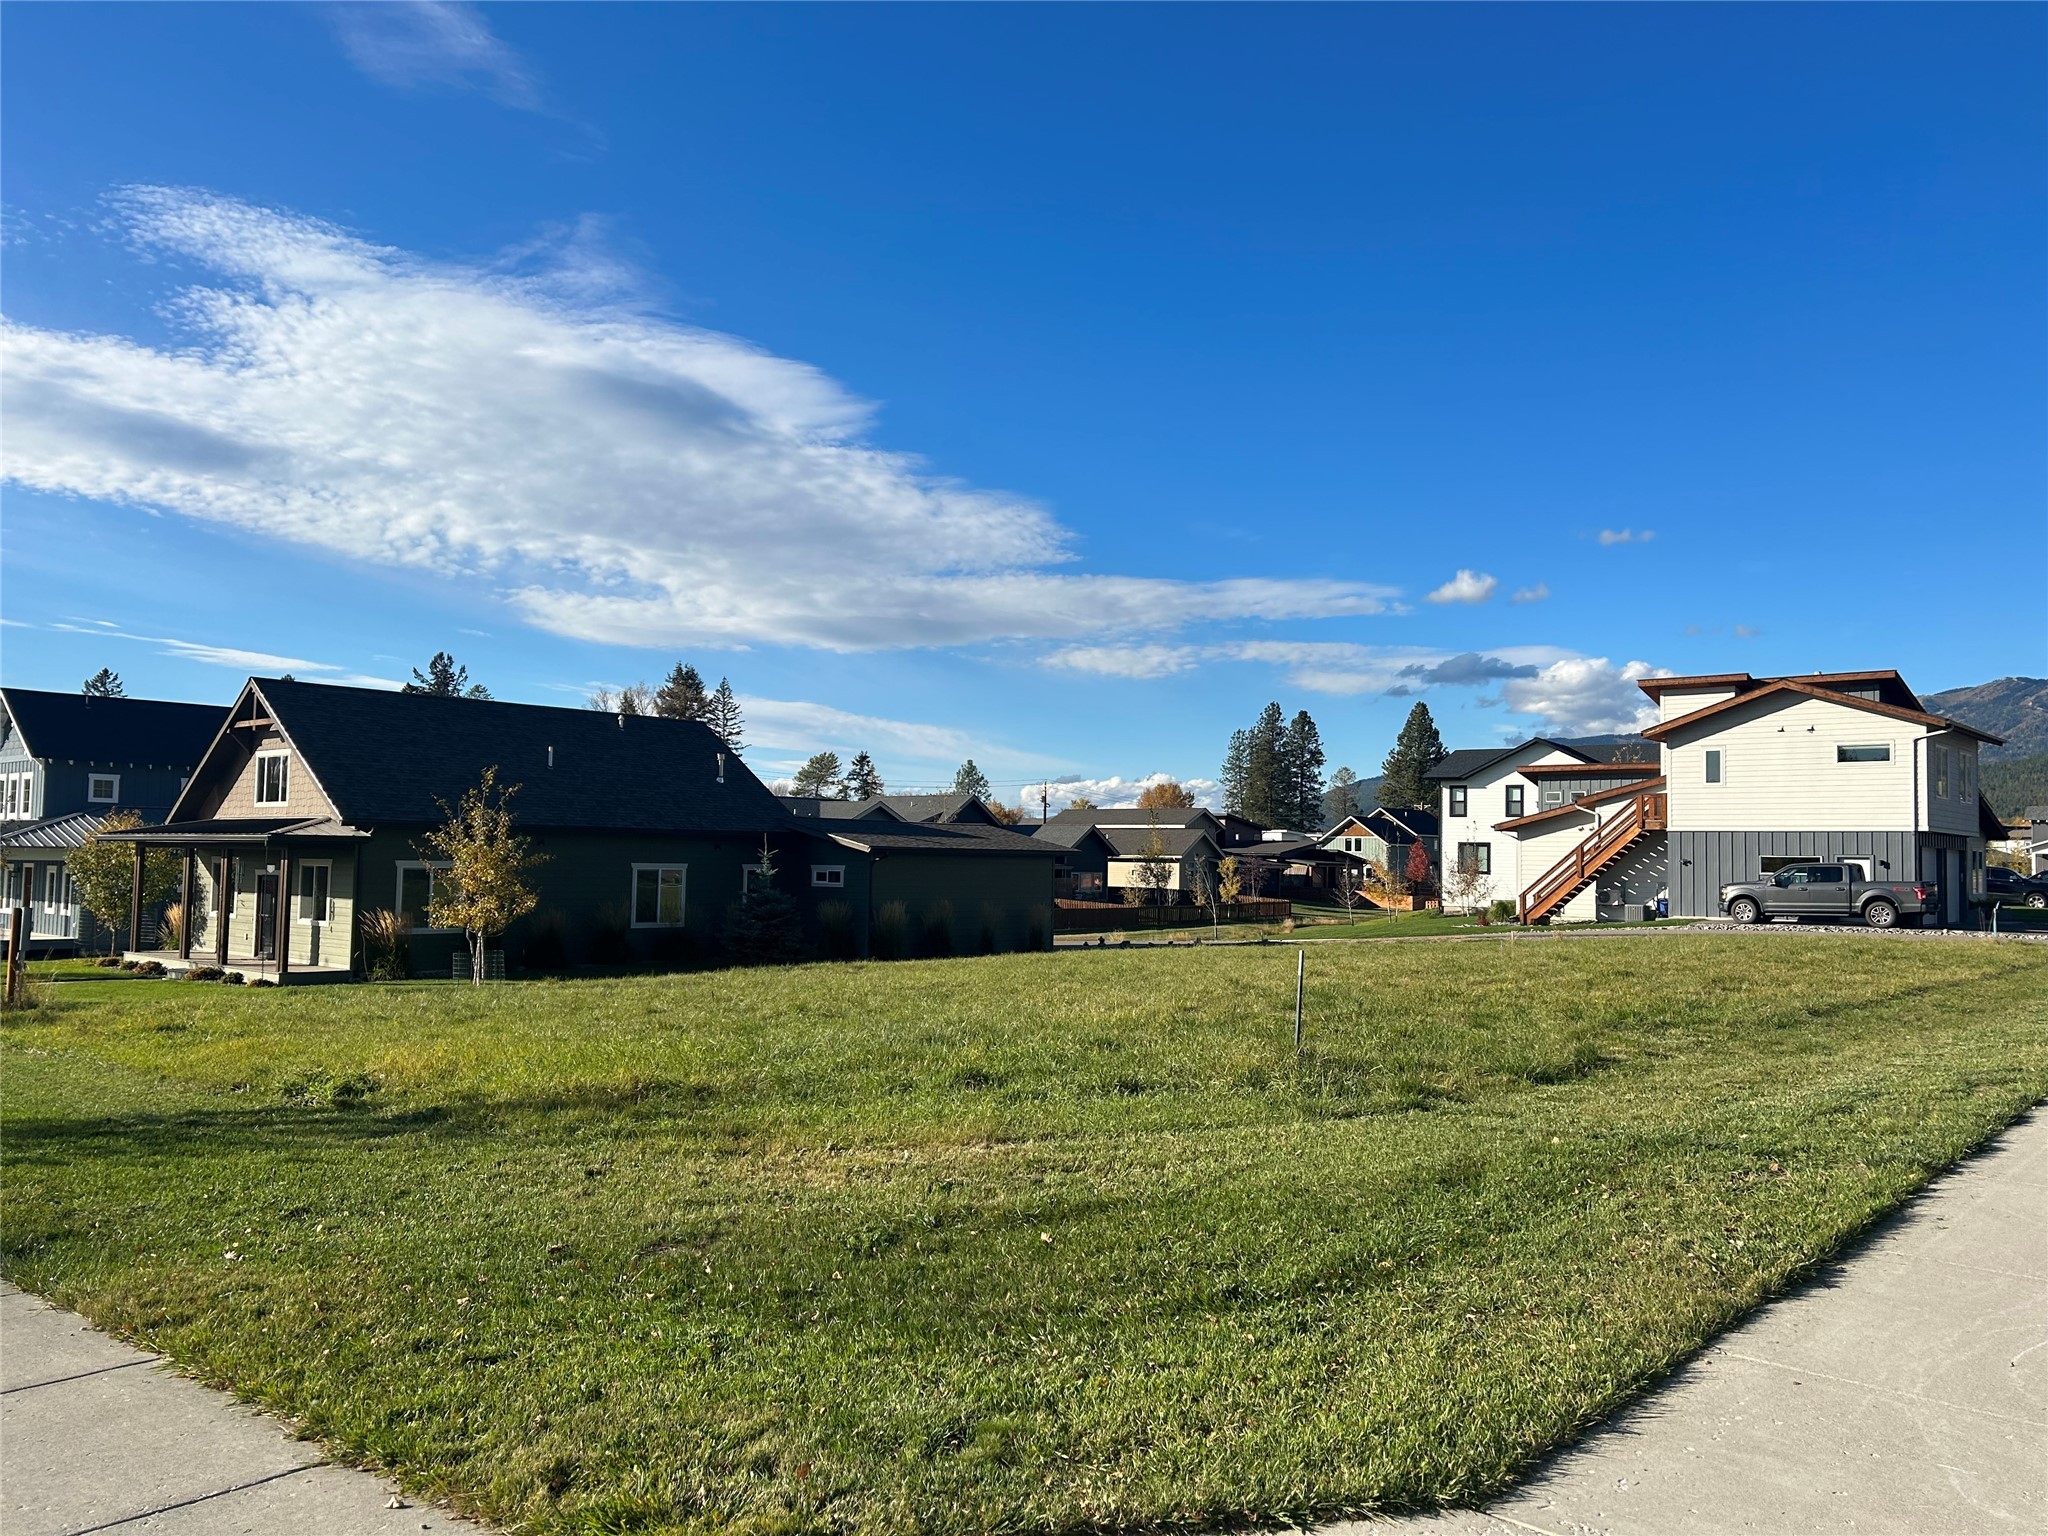 Build your dream home just blocks from downtown Whitefish in a well established subdivision at High Point on Second Street. Peak-a-boo views of Whitefish Mountain Resort, minutes from the dog park, skate park, walking or biking paths, restaurants, shopping and schools, this lot is in the ideal location. This level, almost a quarter of an acre, lot has city water, city sewer and electricity ready to go.  Call Michelle Hoover at 406-249-6431, Patti Codiga at 406-250-4393, or your real estate professional for additional questions.